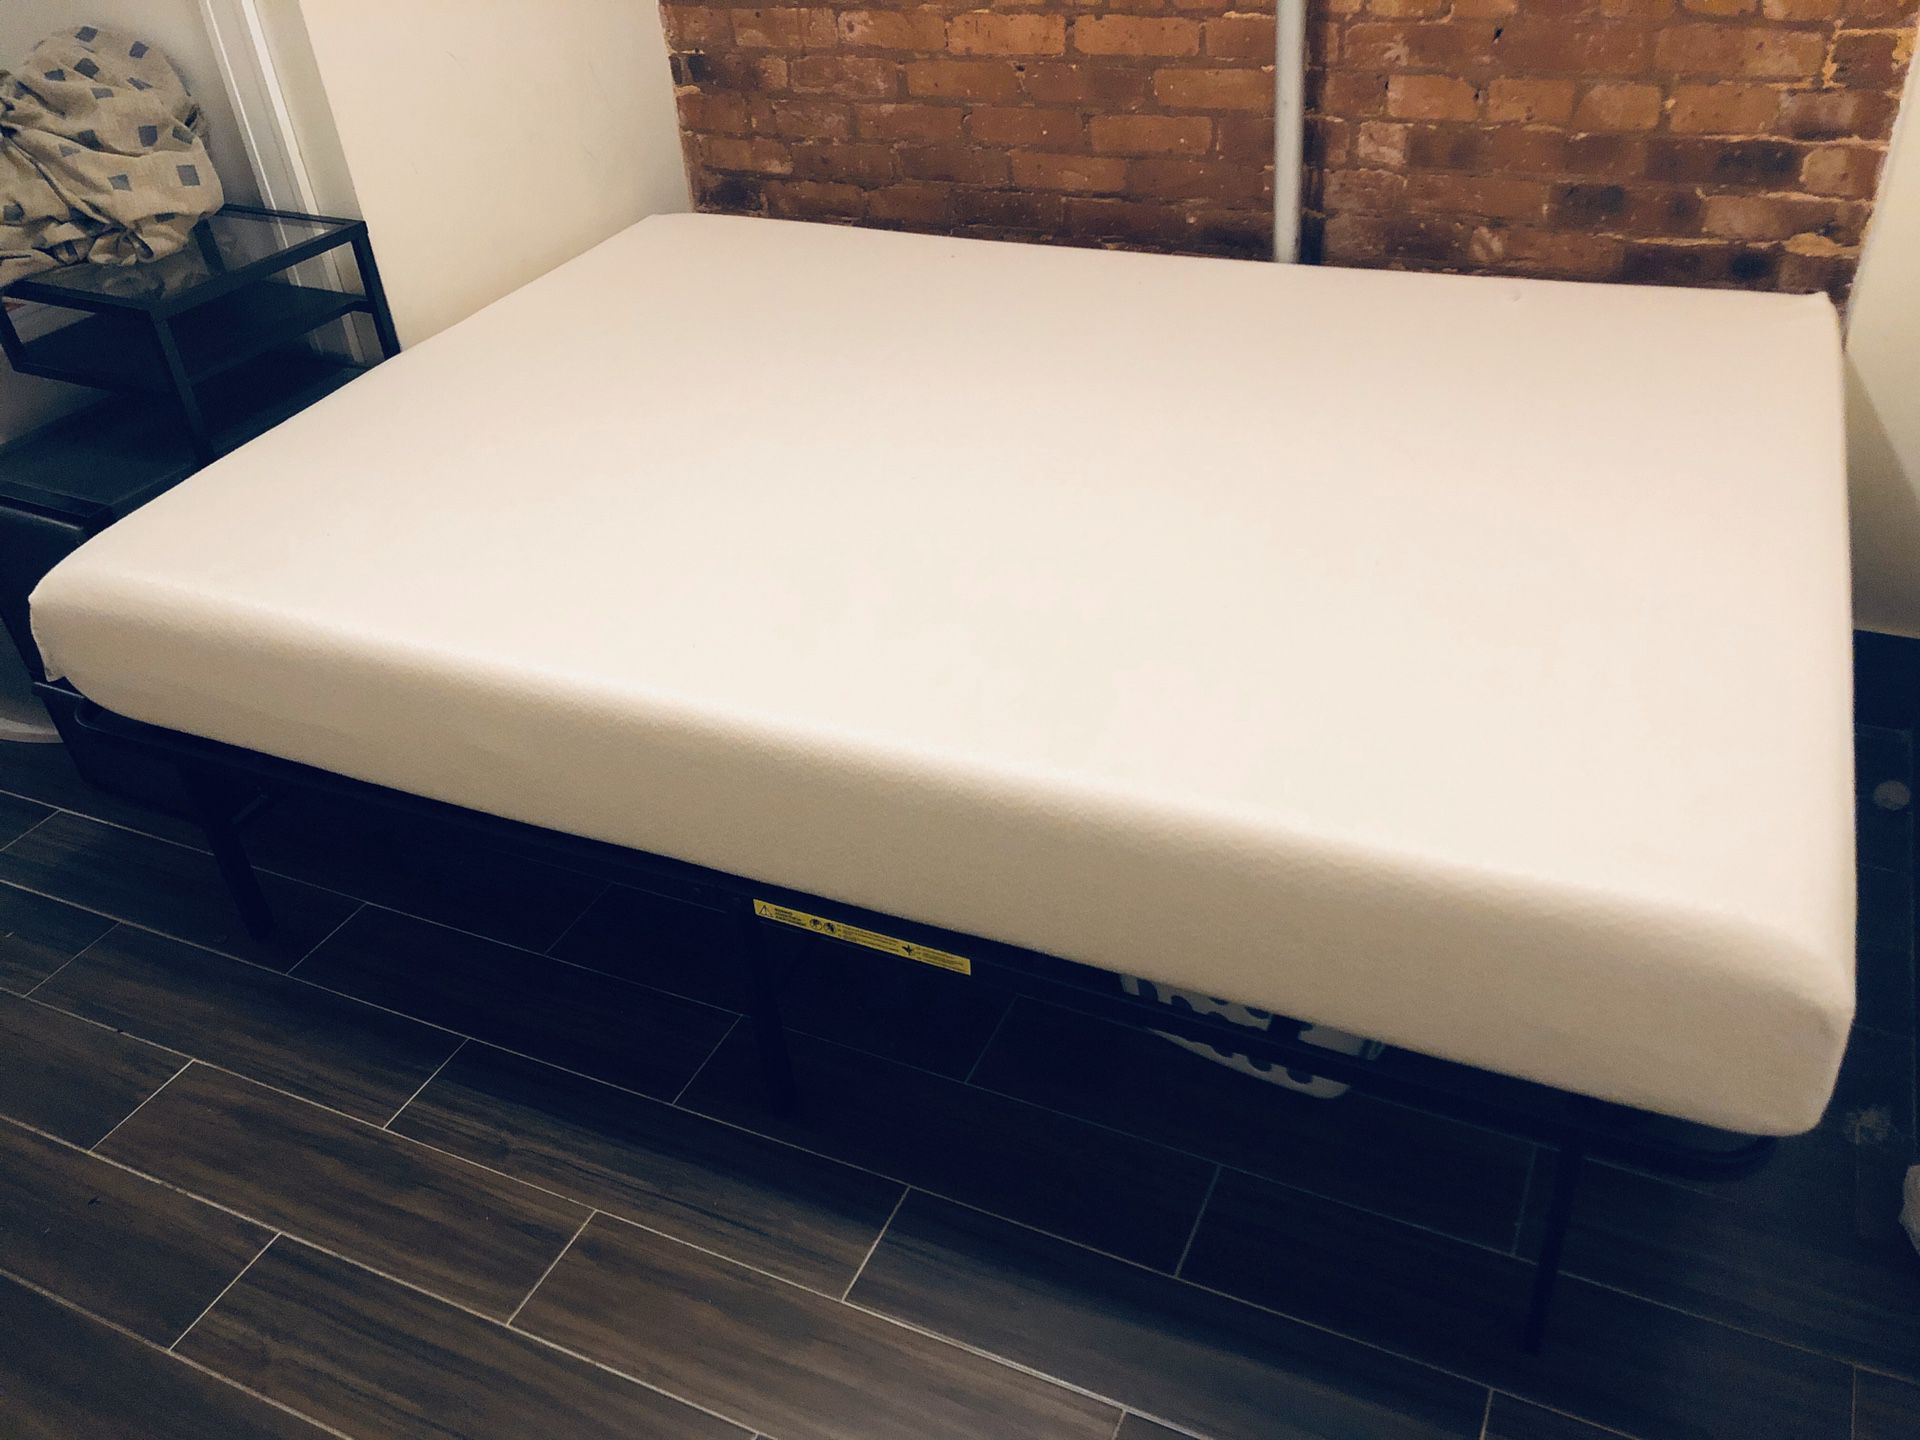 Like New Queen Size Memory Foam Mattress and Bed Frame